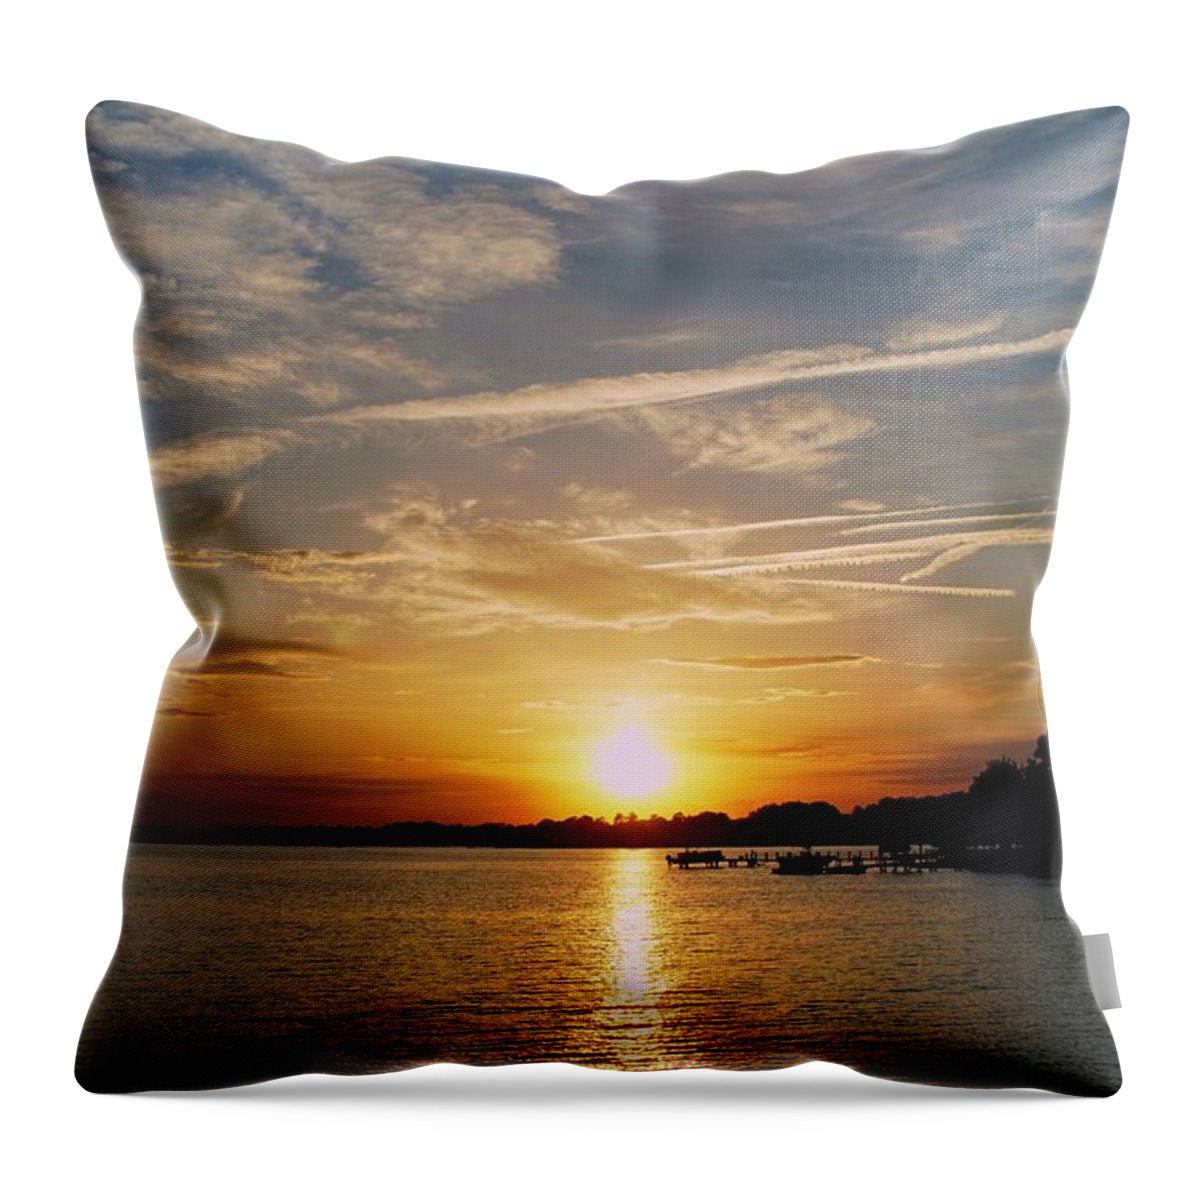 Sunset Throw Pillow featuring the photograph Sunset Over Lake Norman by M Three Photos